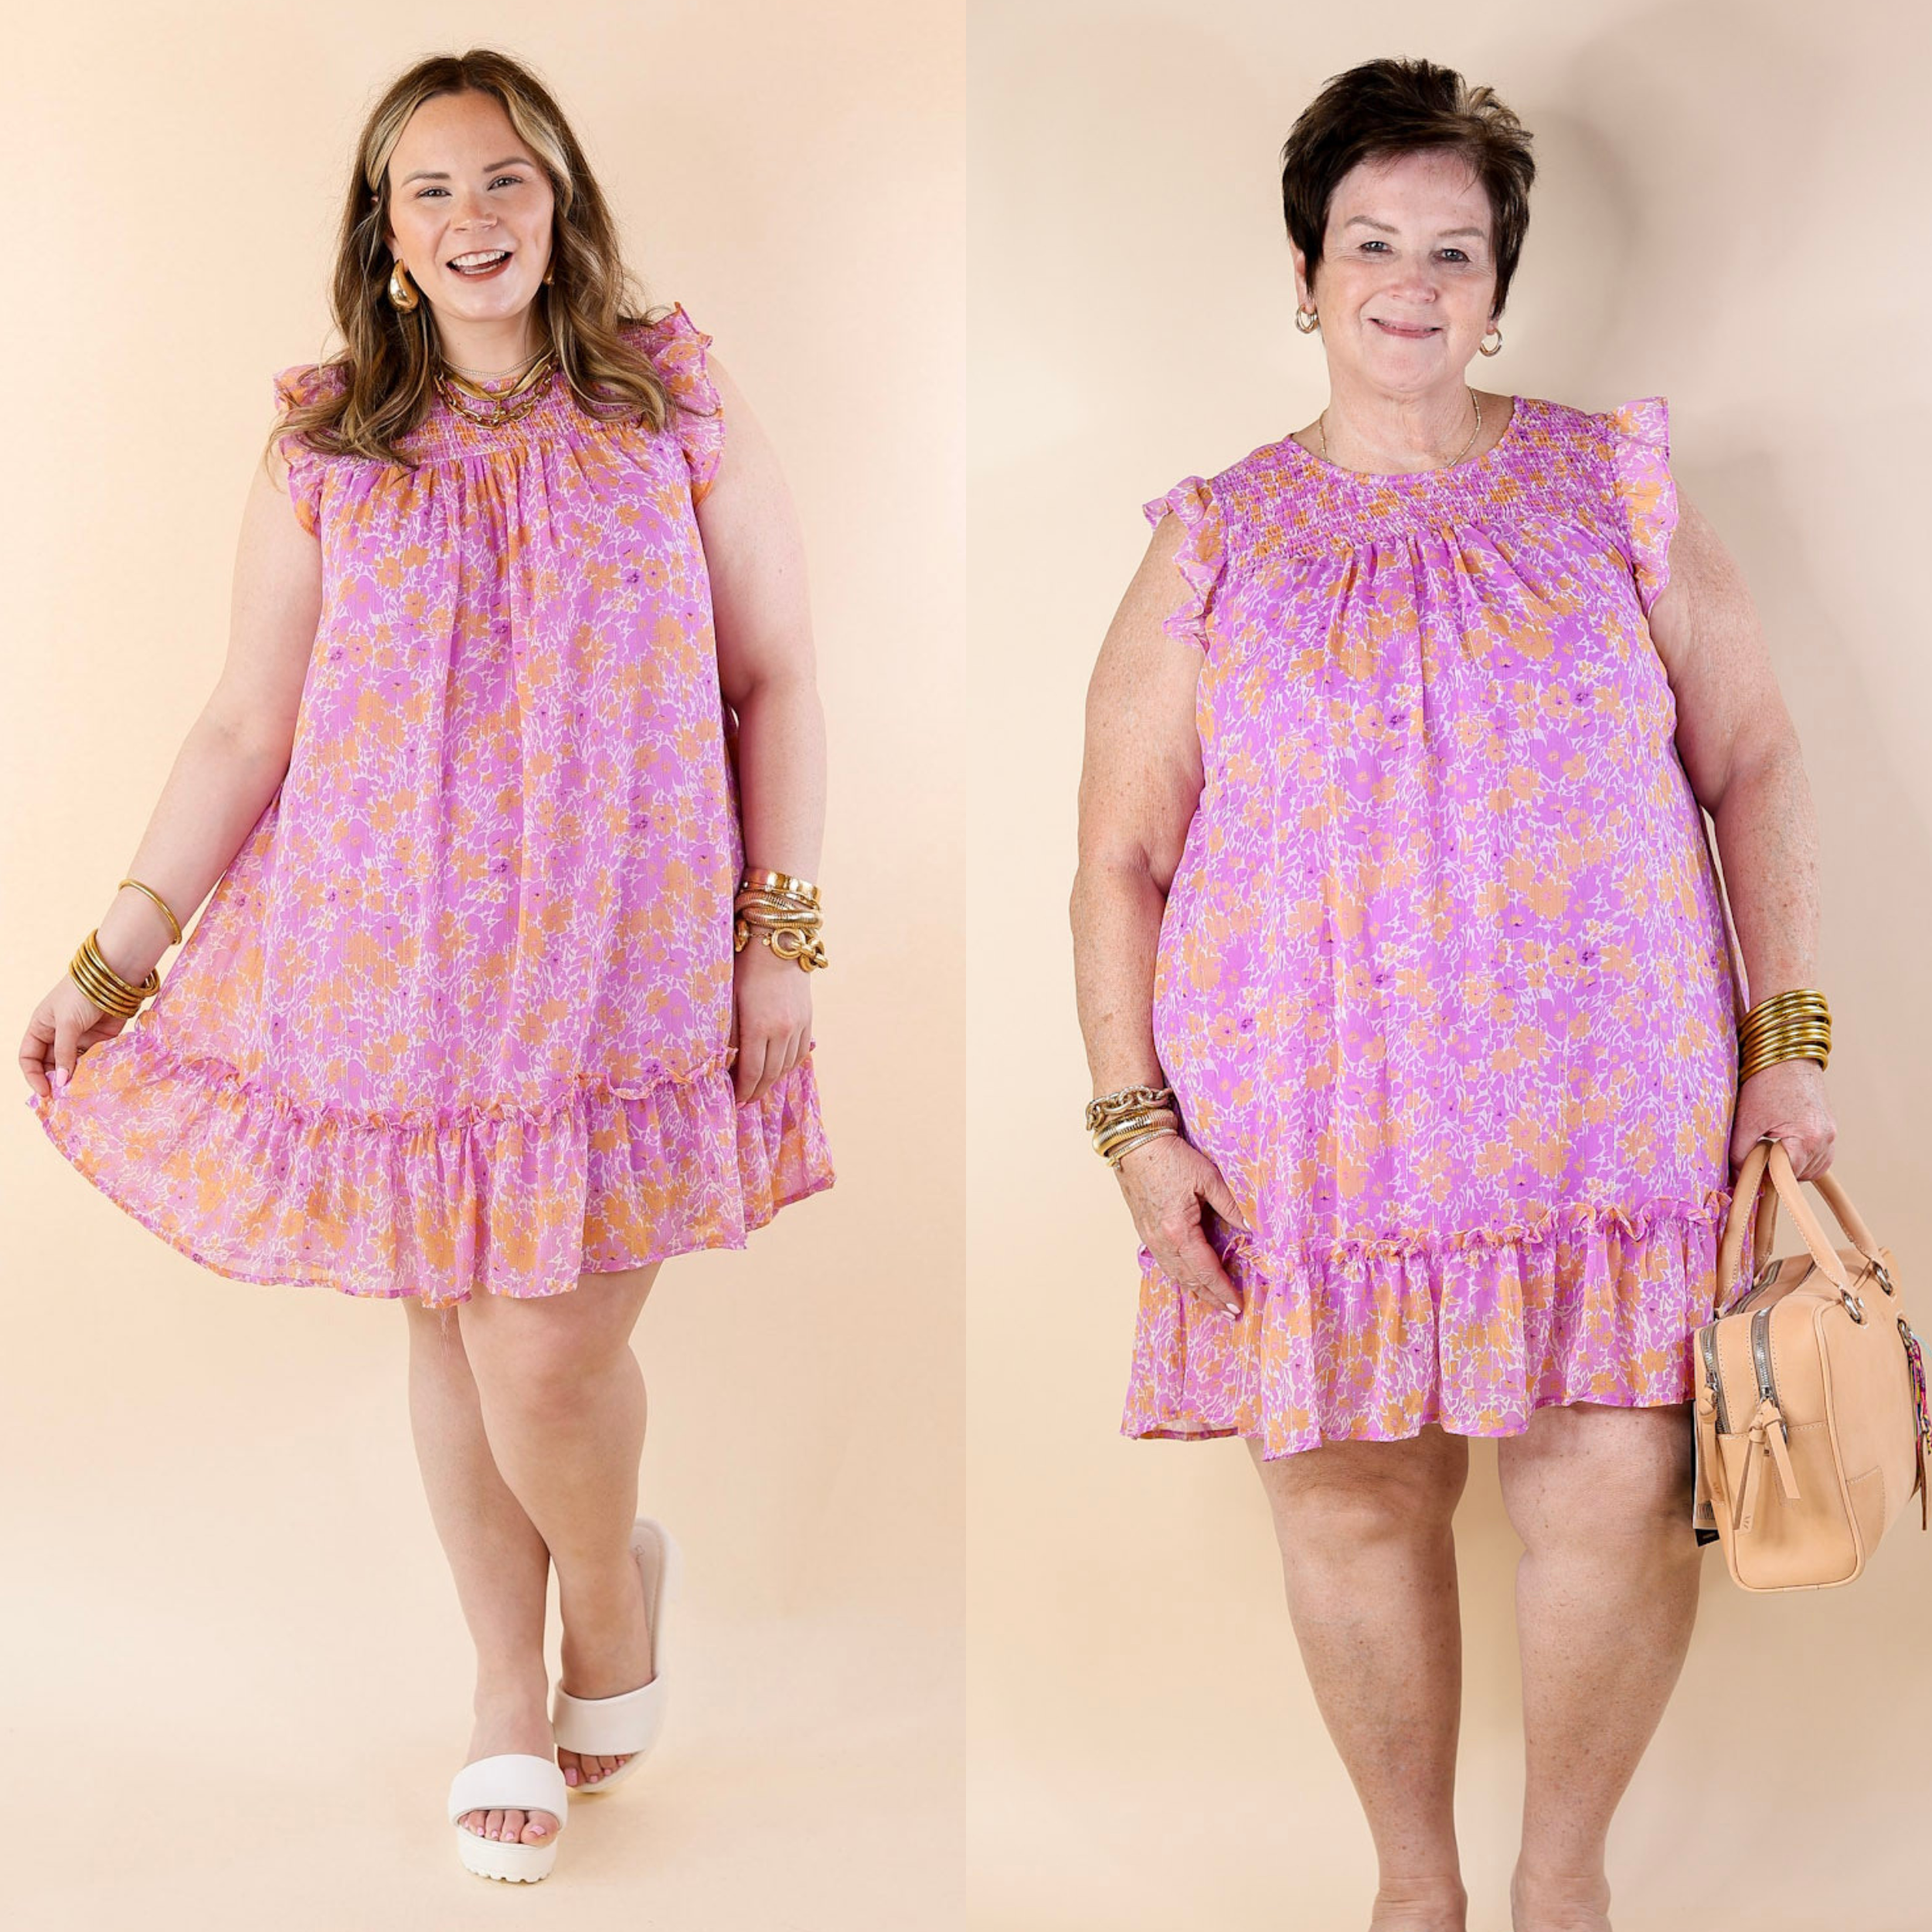 New To The Scene Floral Dress with Ruffle Cap Sleeves in Purple and Orange - Giddy Up Glamour Boutique